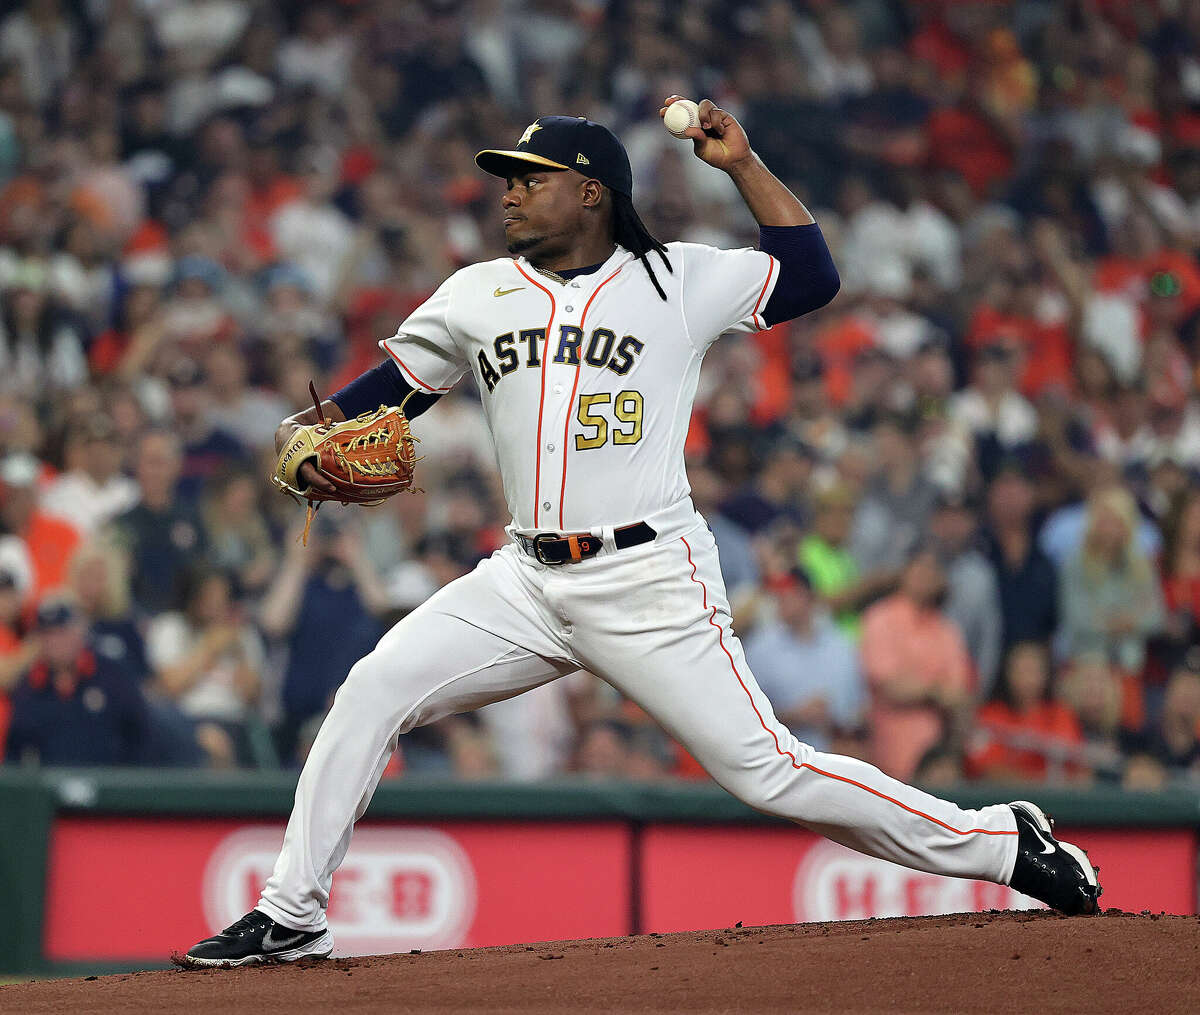 HOUSTON, TEXAS - MARCH 30: Framber Valdez #59 of the Houston Astros pitches in the first inning against the Chicago White Sox on Opening Day at Minute Maid Park on March 30, 2023 in Houston, Texas. (Photo by Bob Levey/Getty Images)